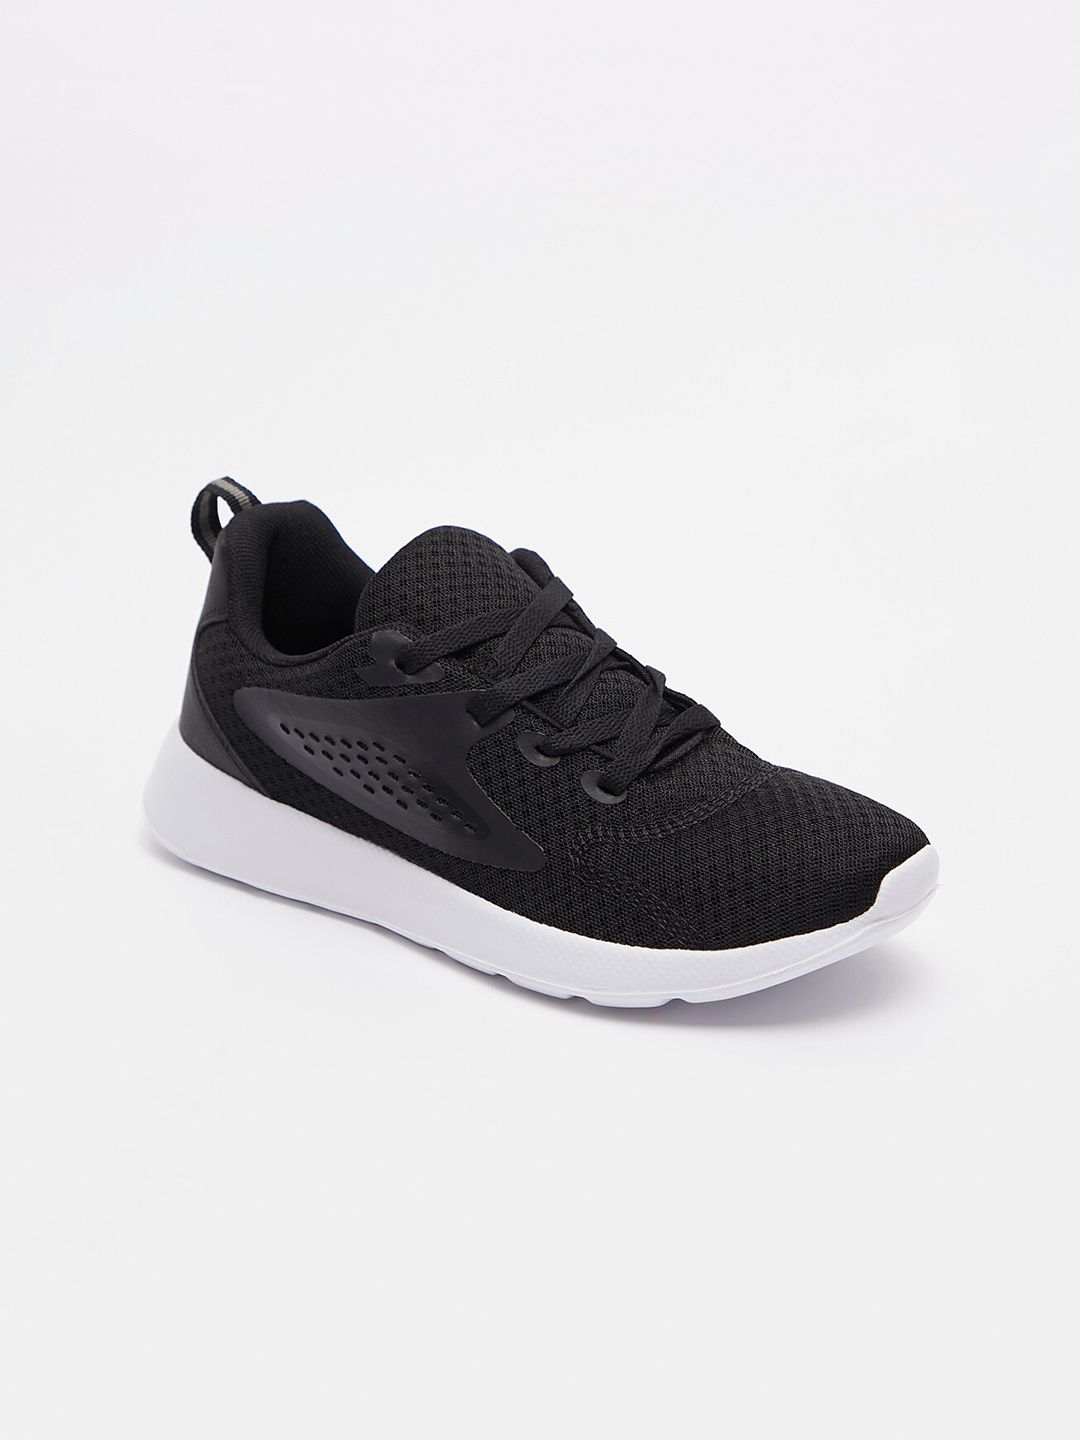 shoexpress Women Black Textile Training or Gym Non-Marking Shoes Price in India